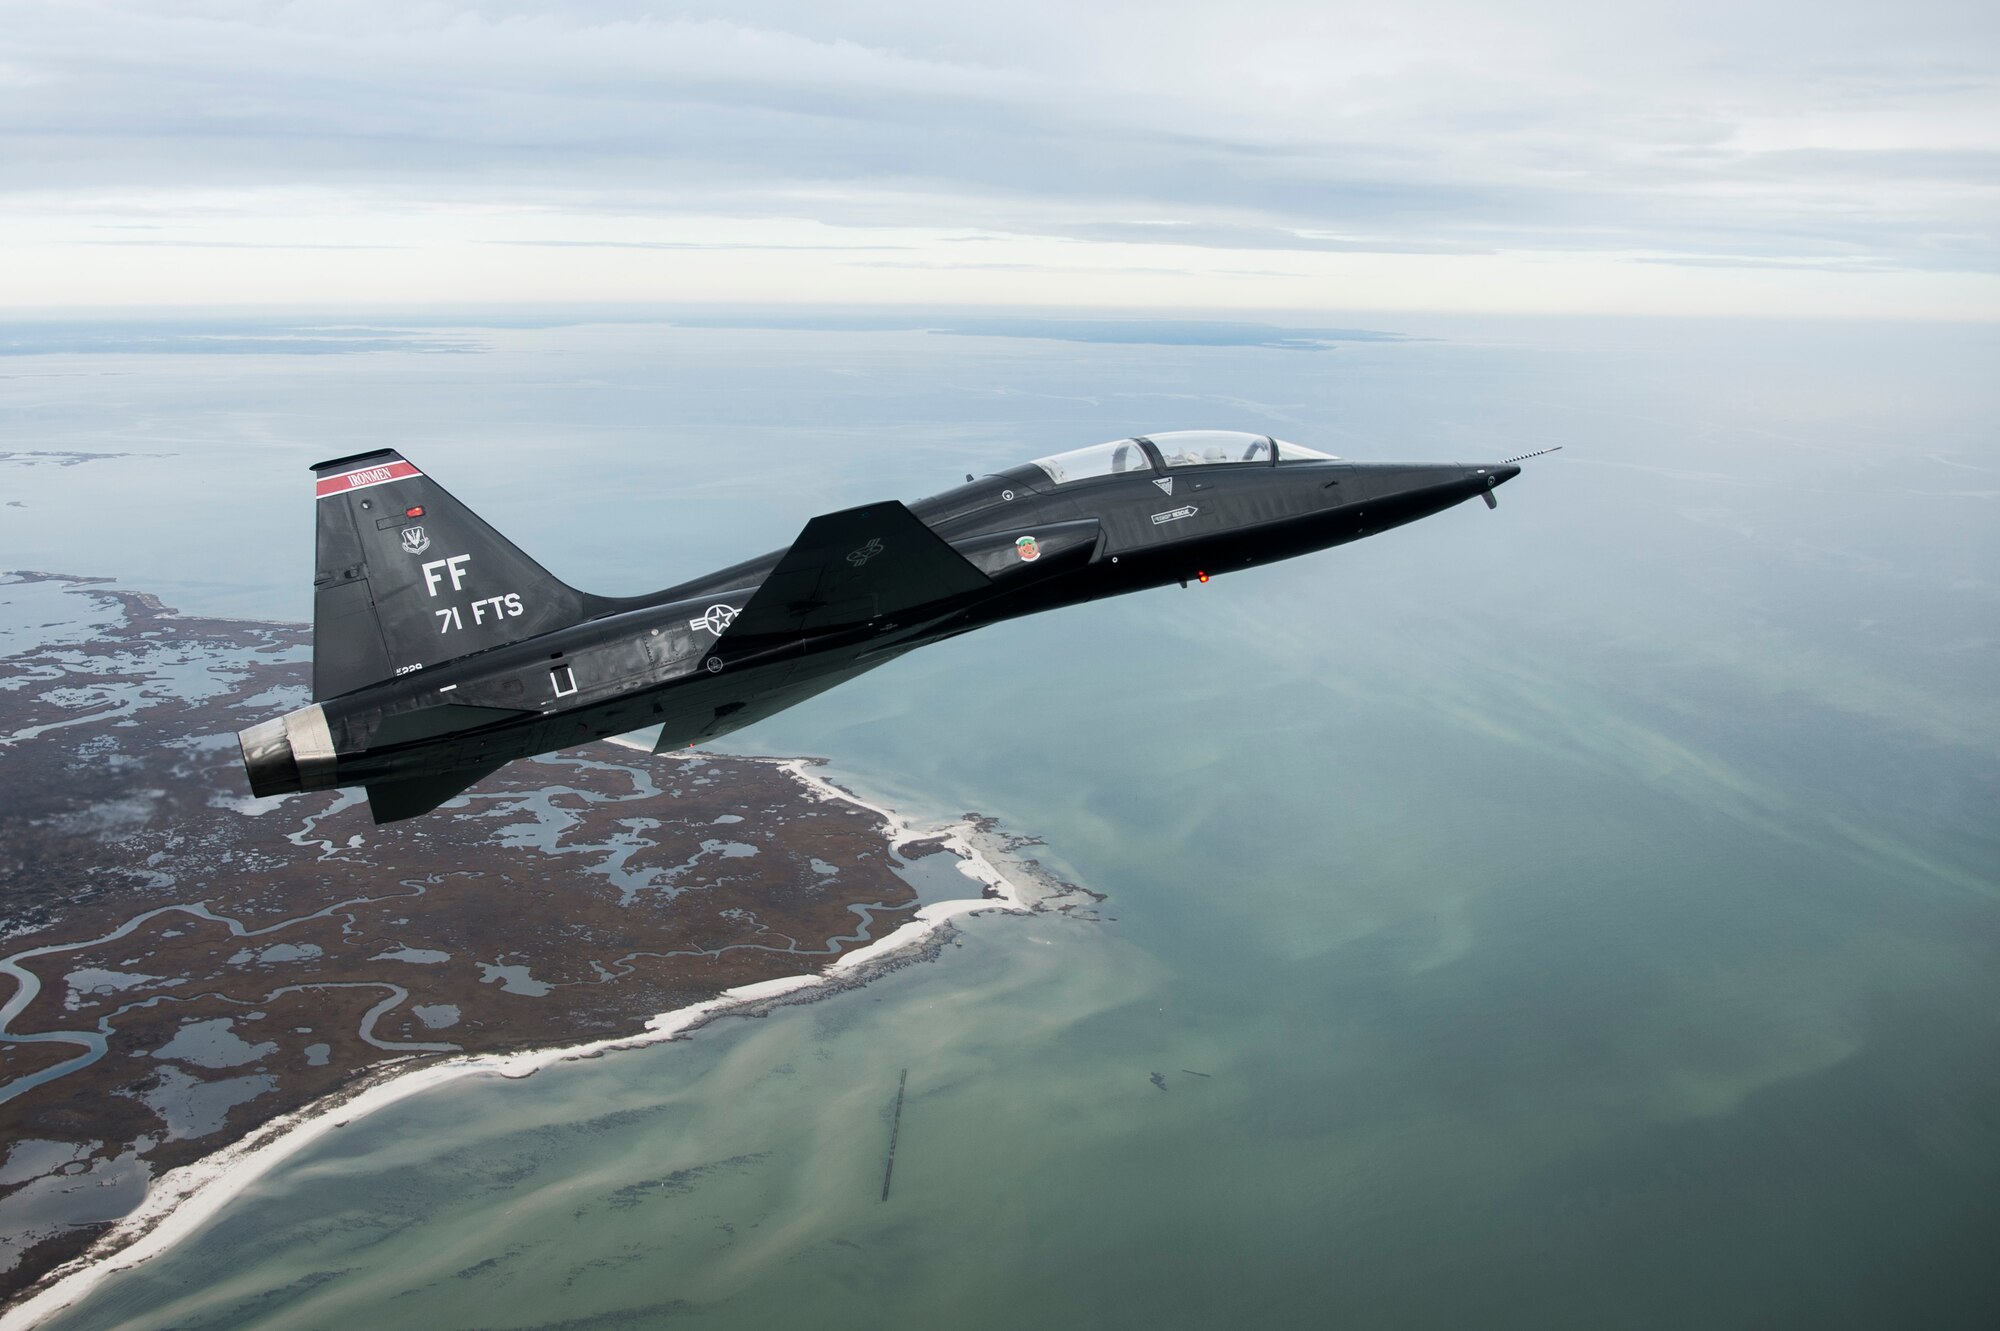 A T-38 Talon approaches the Atlantic Ocean after departing from Langley Air Force Base, Va., Dec. 7, 2015. As part of the Trilateral Exercise, the Talon’s will be acting as adversary aircraft. (U.S. Air Force photo by Senior Airman Kayla Newman)